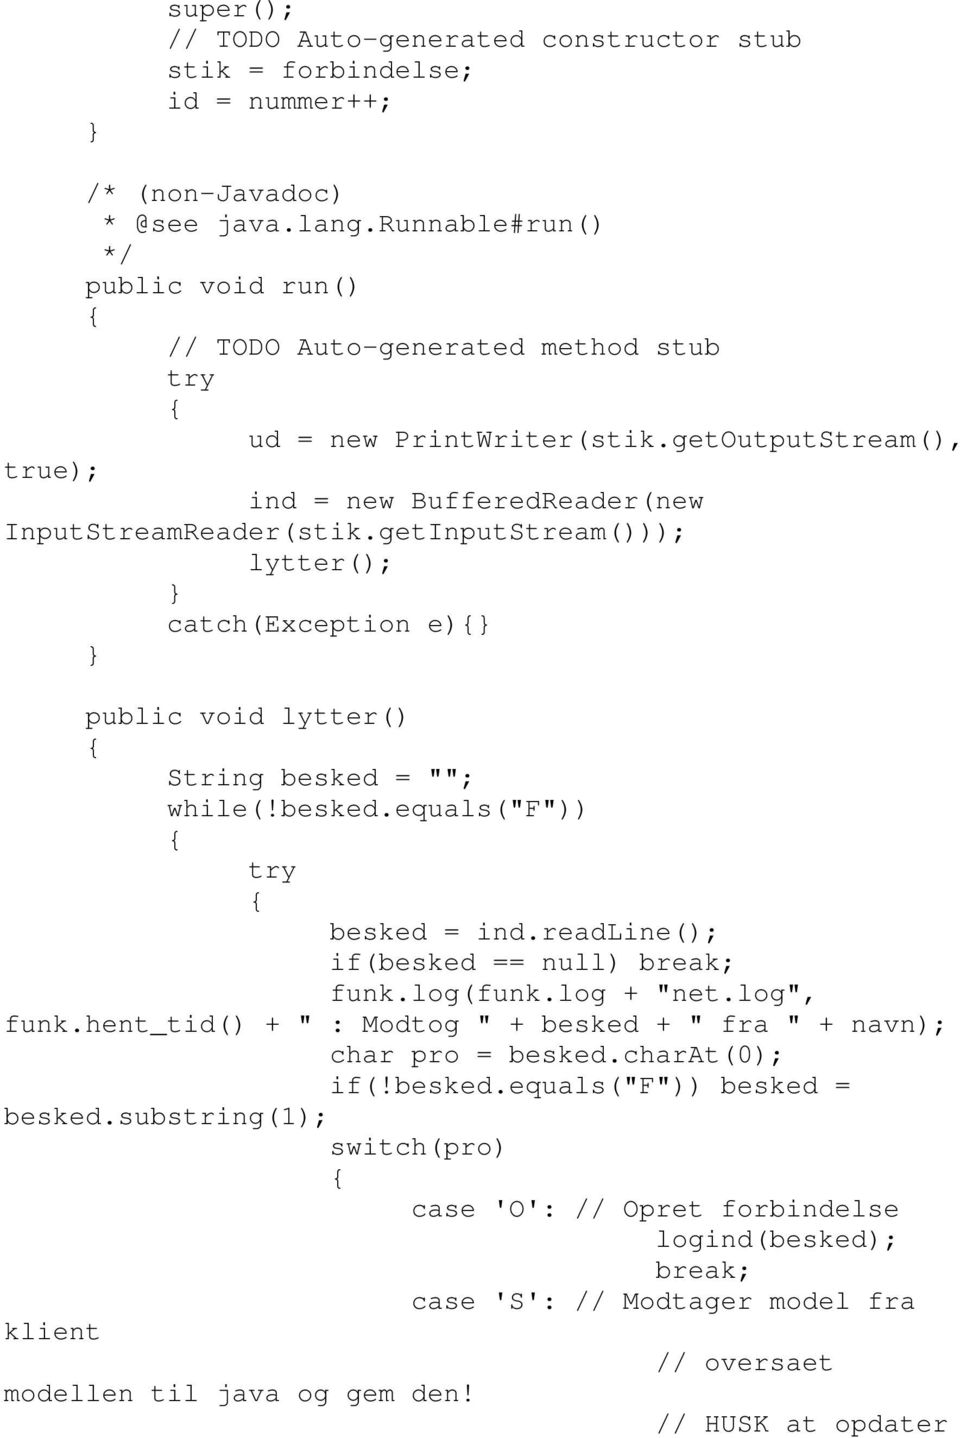 getInputStream())); lytter(); catch(exception e) public void lytter() String besked = ""; while(!besked.equals("f")) try besked = ind.readline(); if(besked == null) break; funk.log(funk.log + "net.